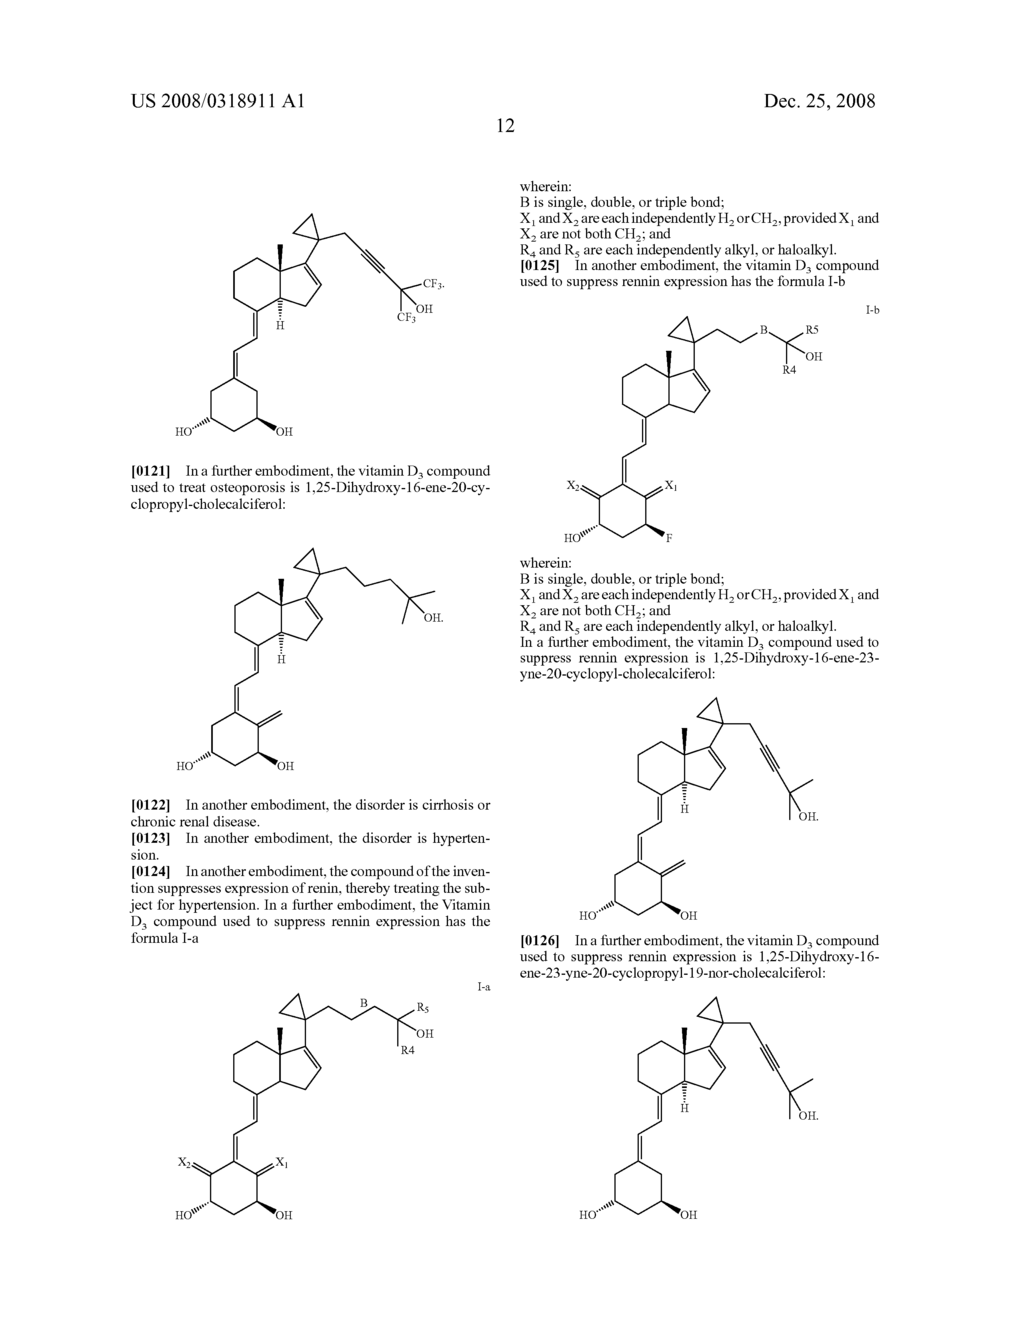 20-Cyclopropyl, 26,27-Alkyl/Haloalkyl Vitamin D3 Compounds and Methods of Use Thereof - diagram, schematic, and image 17